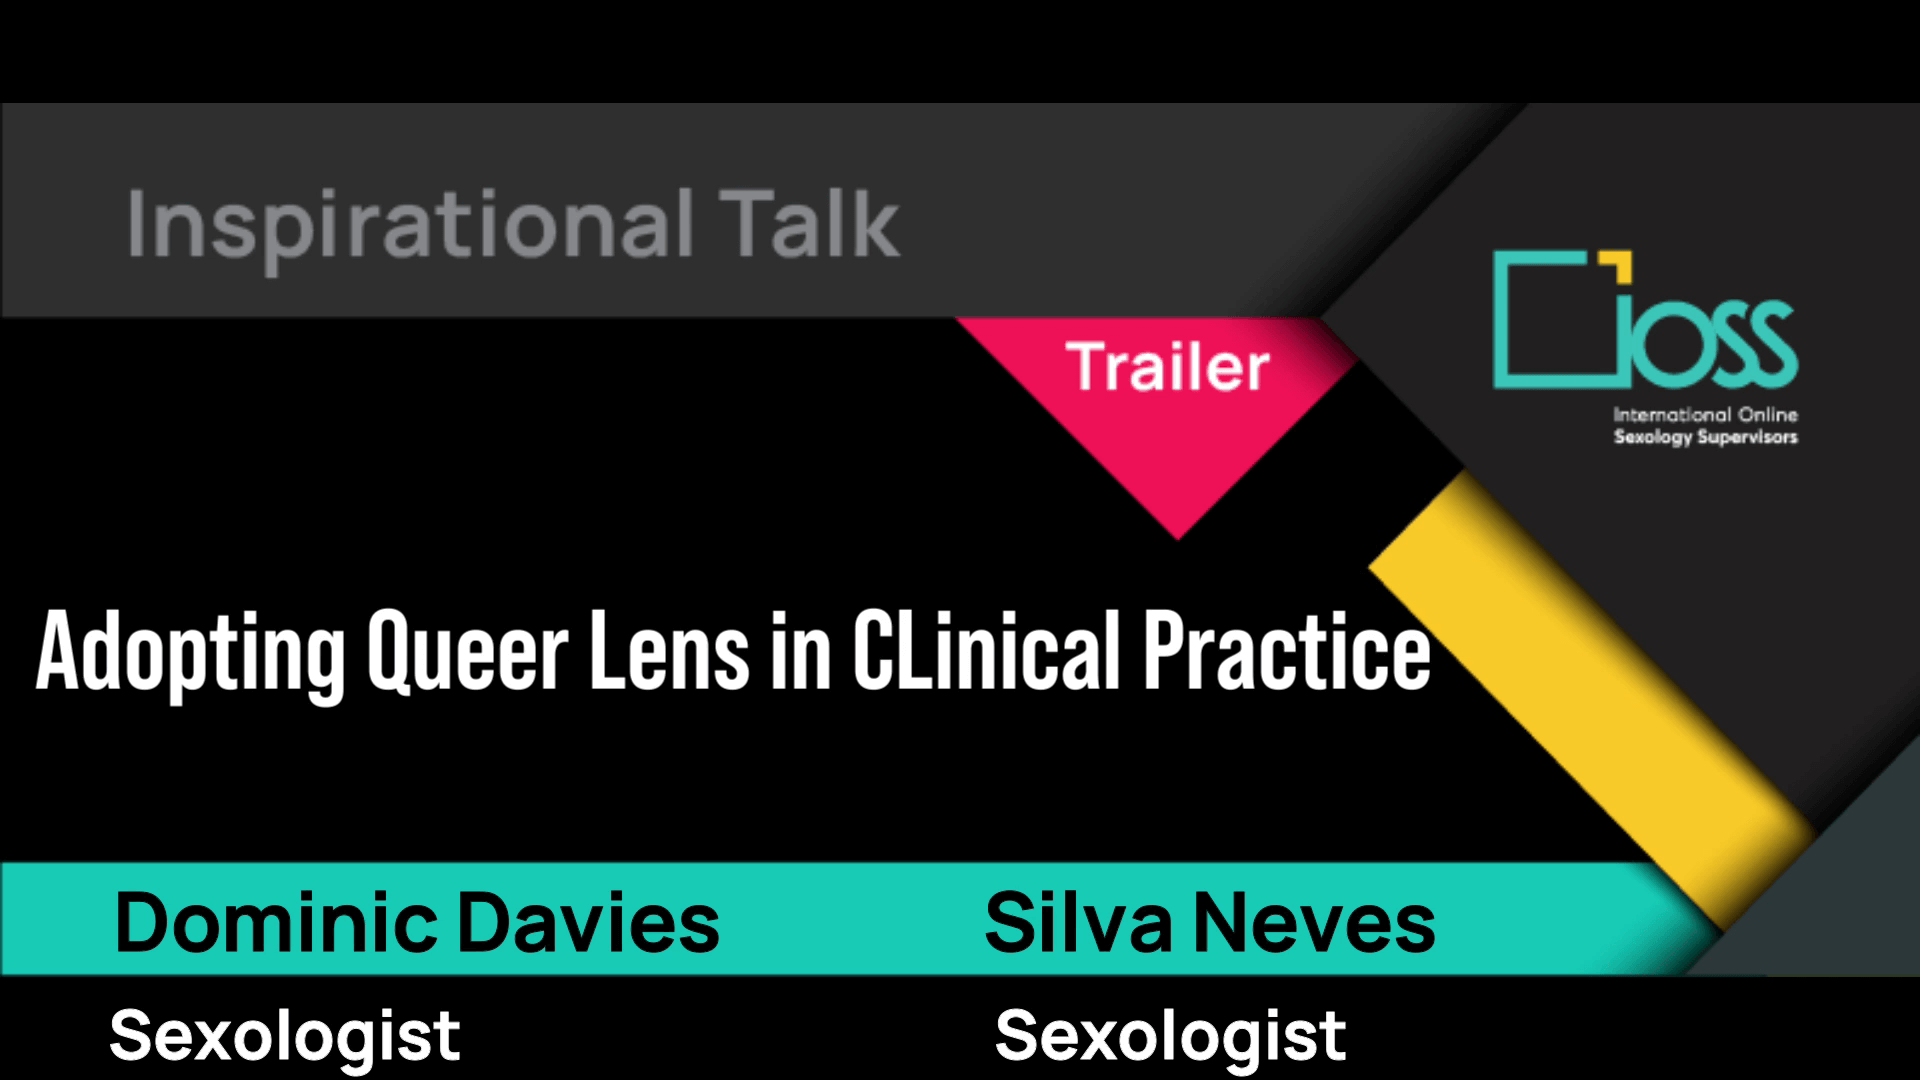 Trailer Adopting Queer Lens in Clinical Practice